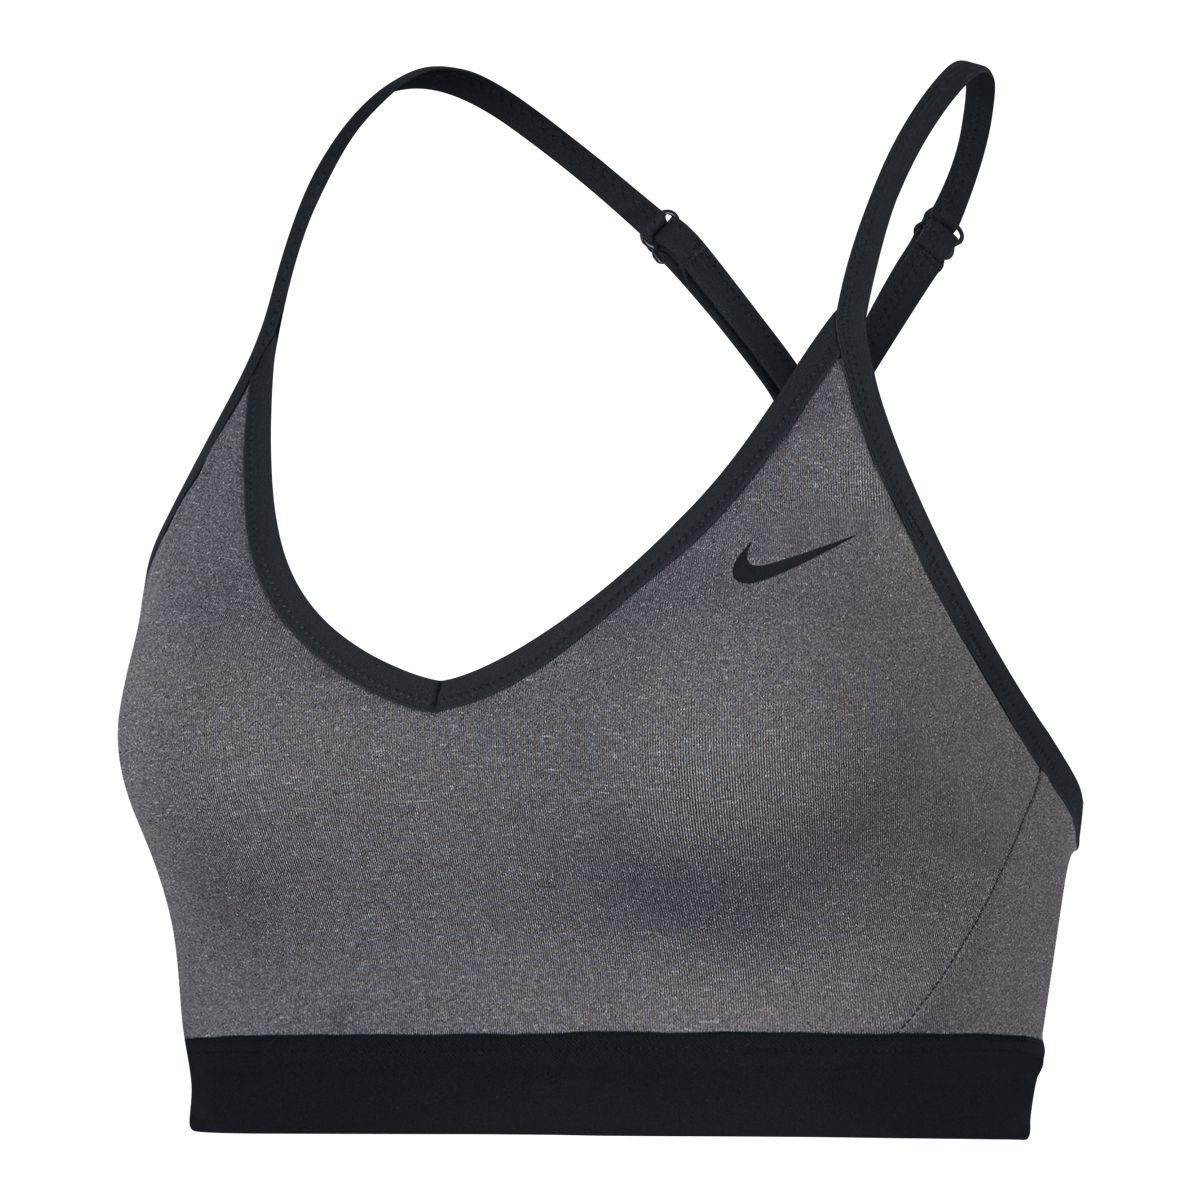 Women's Nike Indy Sports Bra offers light support during low-impact,  high-enegry workouts such as Pilates, barre and yoga. The low-cut design  and thin, adjustable straps provide feminine detail while the back mesh